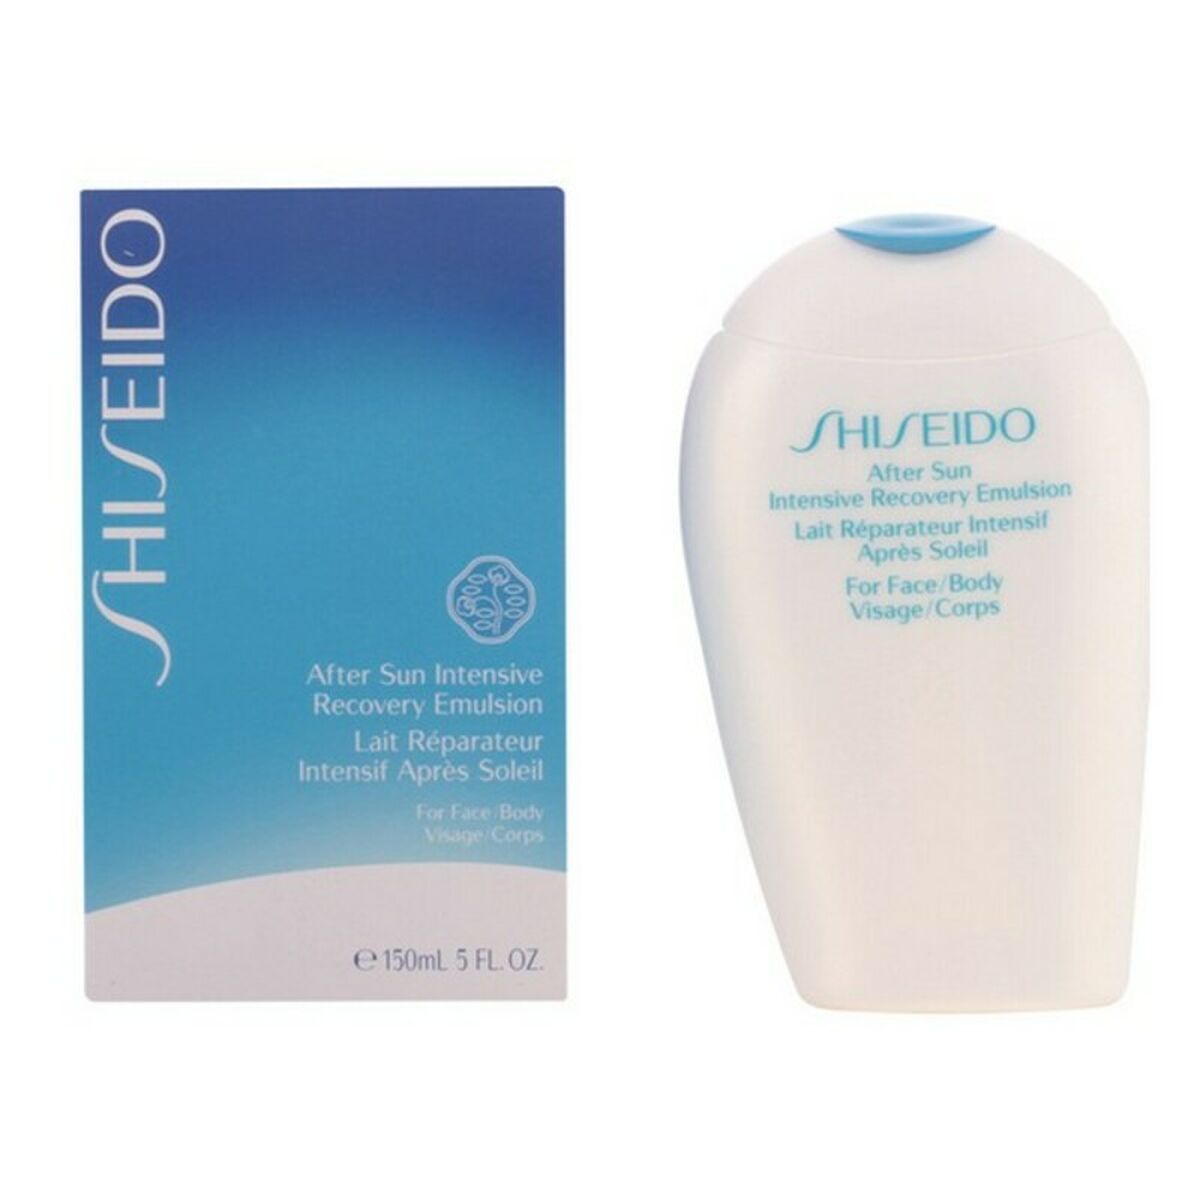 SHISEIDO After Sun Intensive Recovery Emulsion 150 ml